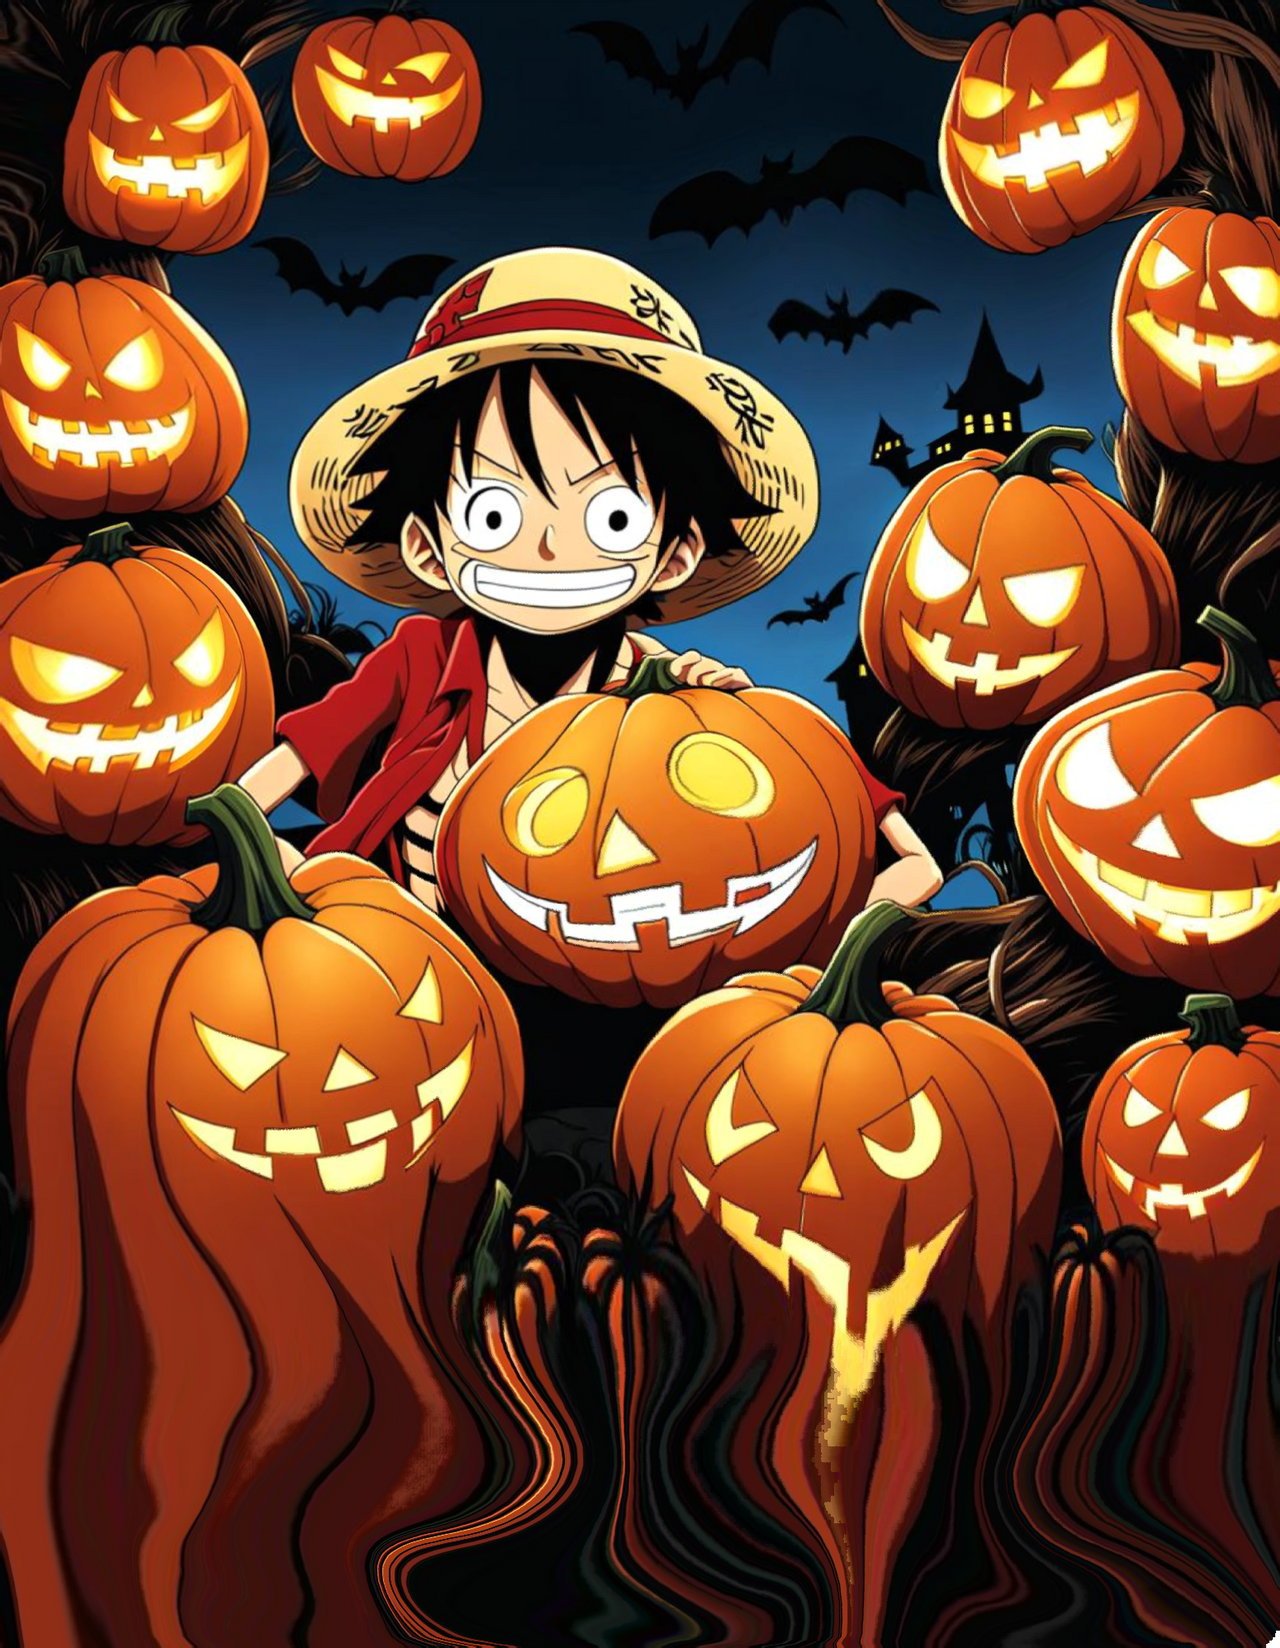 One Piece pumpkin carving #onepice #onepieceanime #onepieceluffy